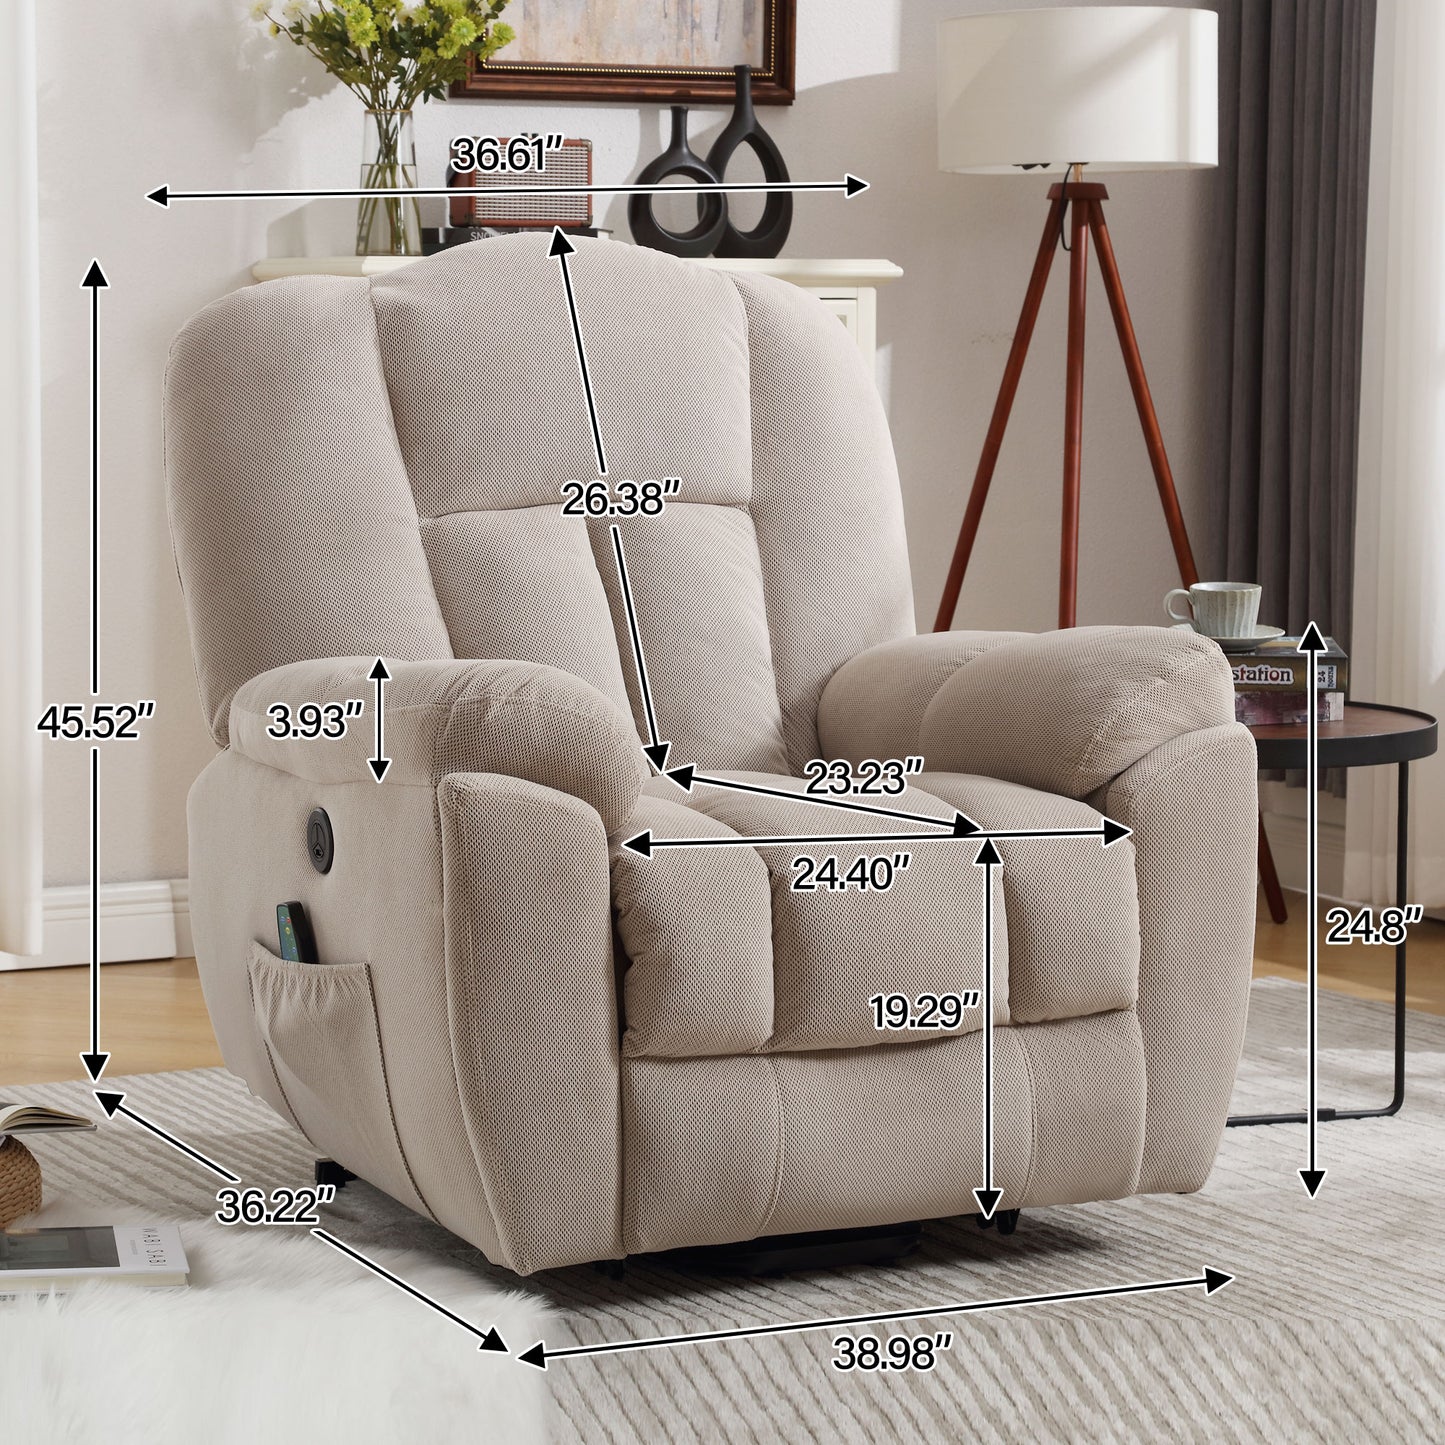 24.4" Wide Large Power Lift Recliner Chair, BTMWAY Oversize Electric Lift Recliners for Elderly with Heat and Massage, 3 Position Electric Recliner Chair for Home Use with Hidden Cup Holder, Beige